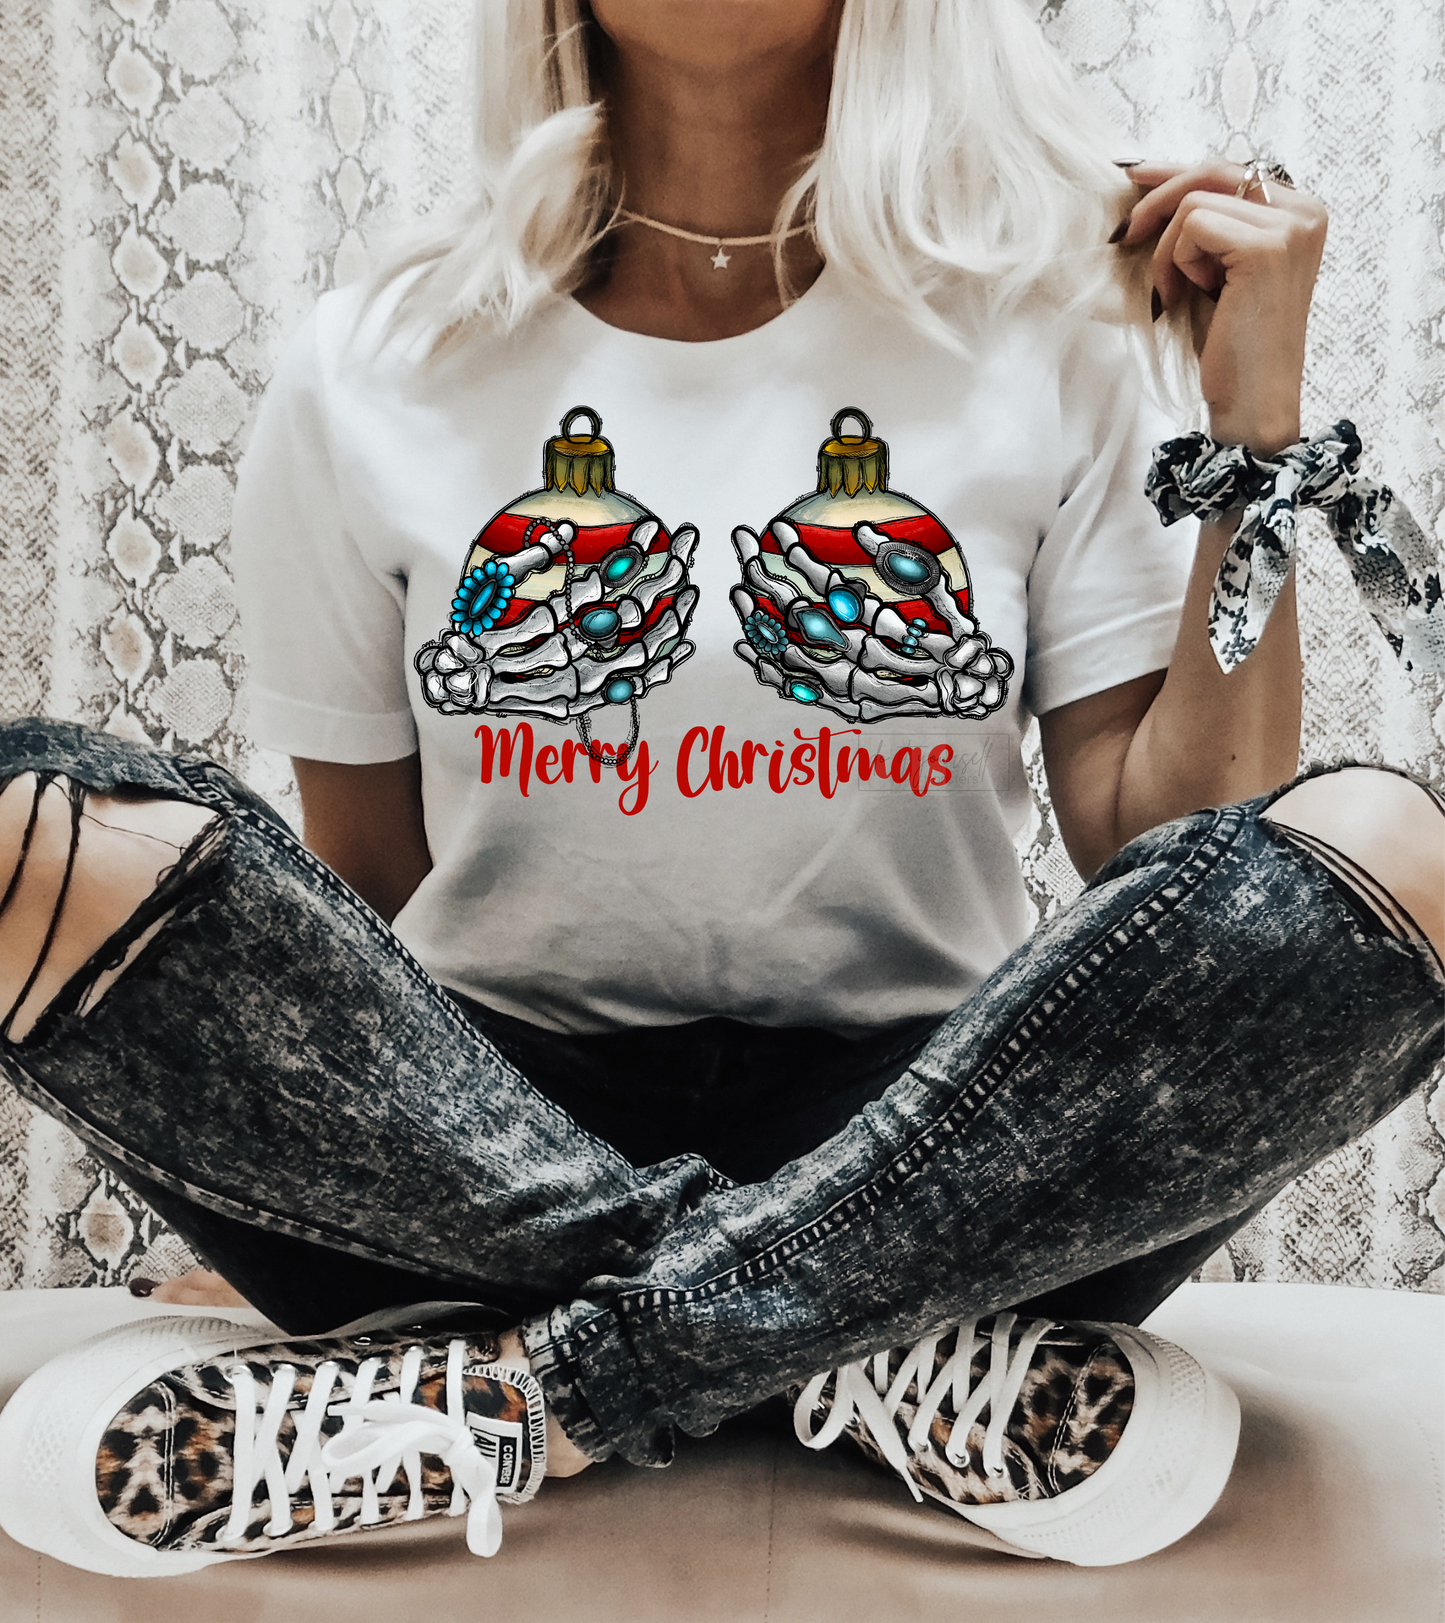 RTS Merry Christmas Skeleton Hand jewel MATTE BREATHABLE CLEAR FILM SCREEN PRINT TRANSFER ADULT 9X12